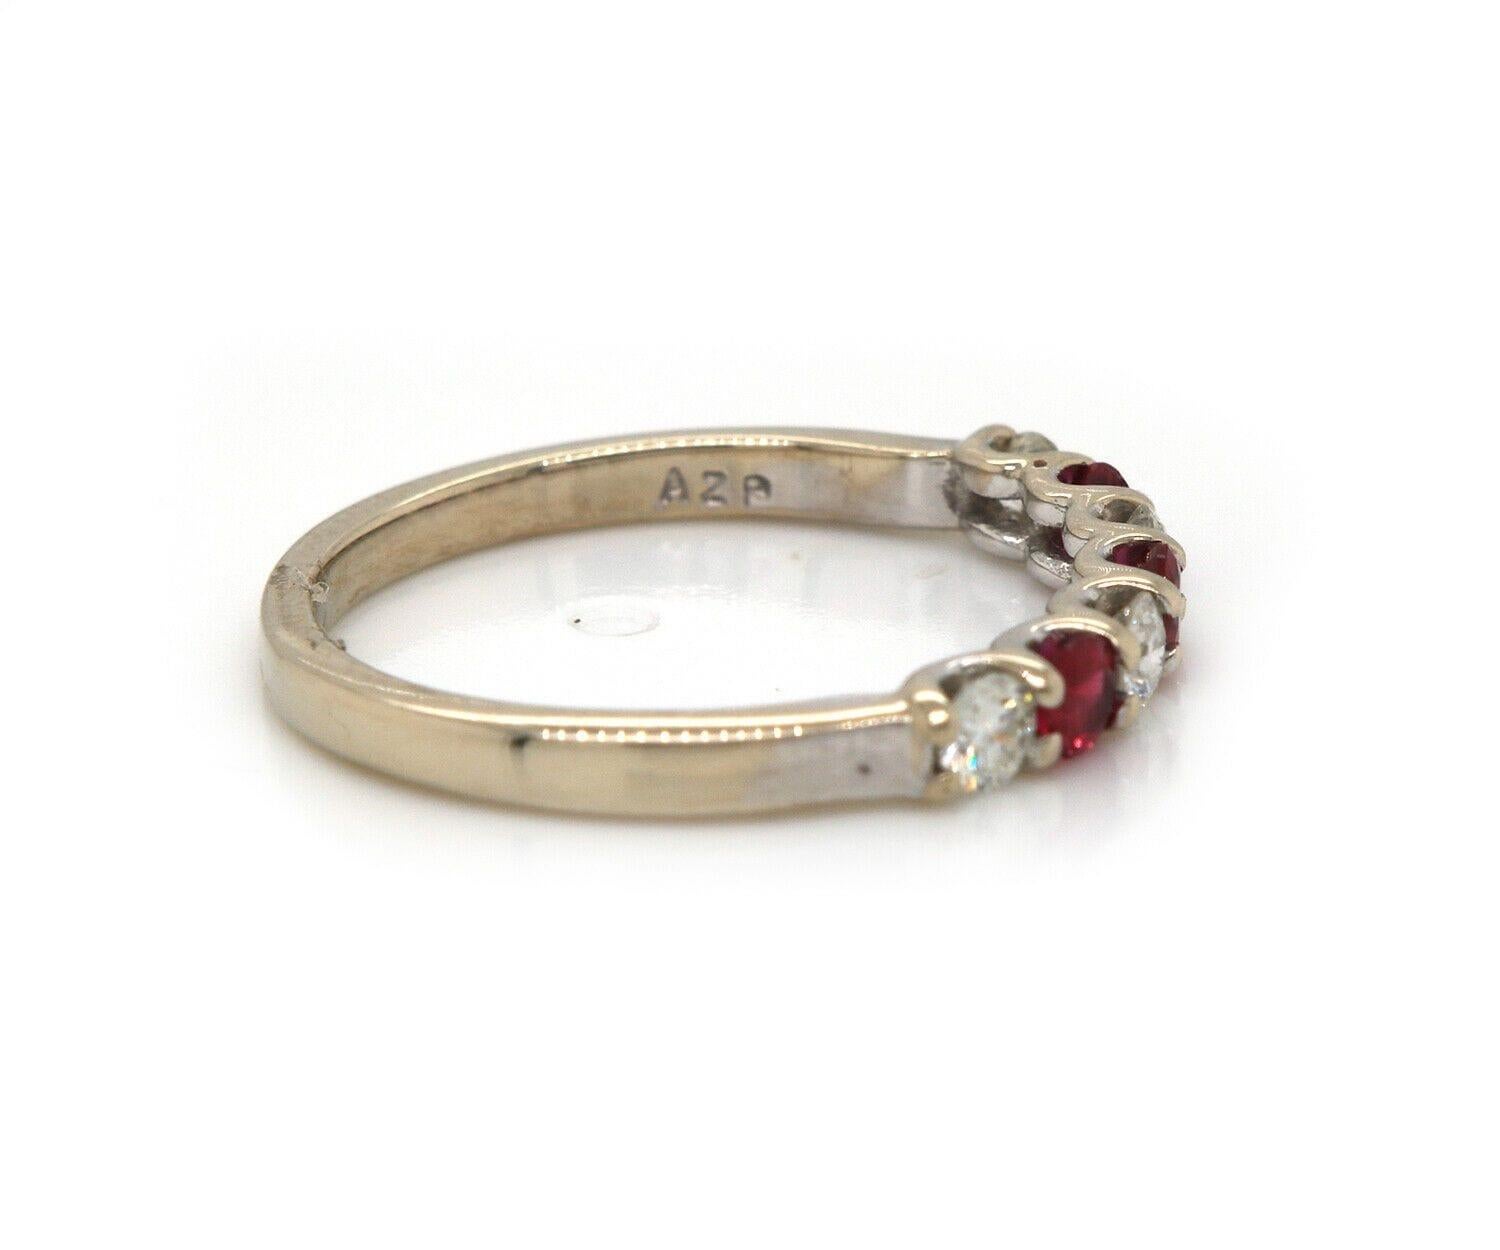 0.36ctw Ruby and 0.28ctw Diamond Alternating Band Ring in 18K White Gold In Excellent Condition For Sale In Vienna, VA